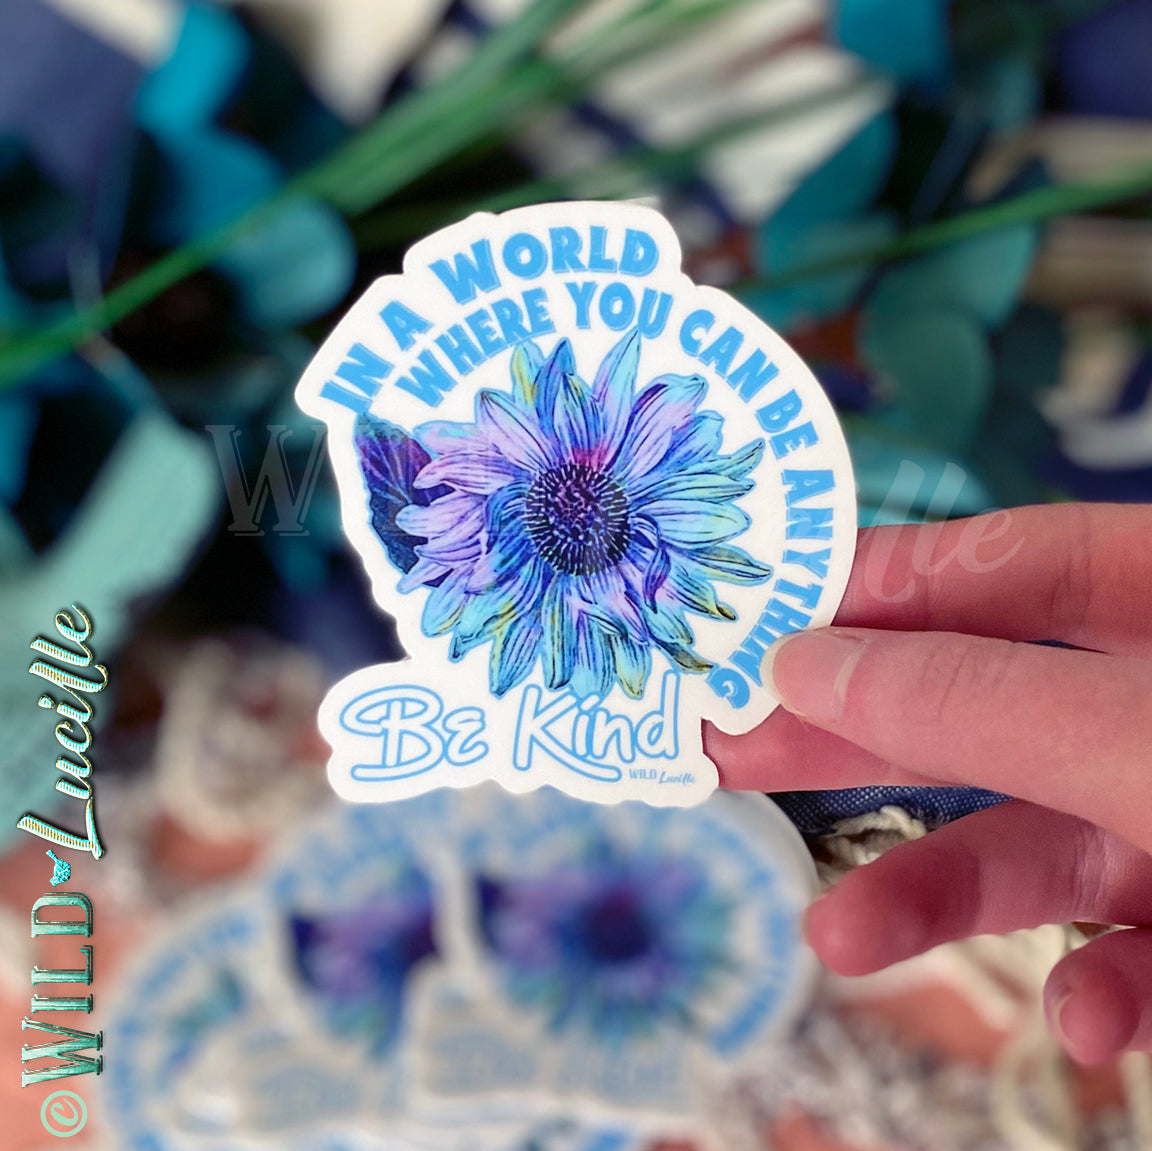 In A World Where You Can Be Anything, Be Kind - Vinyl Sticker Decals